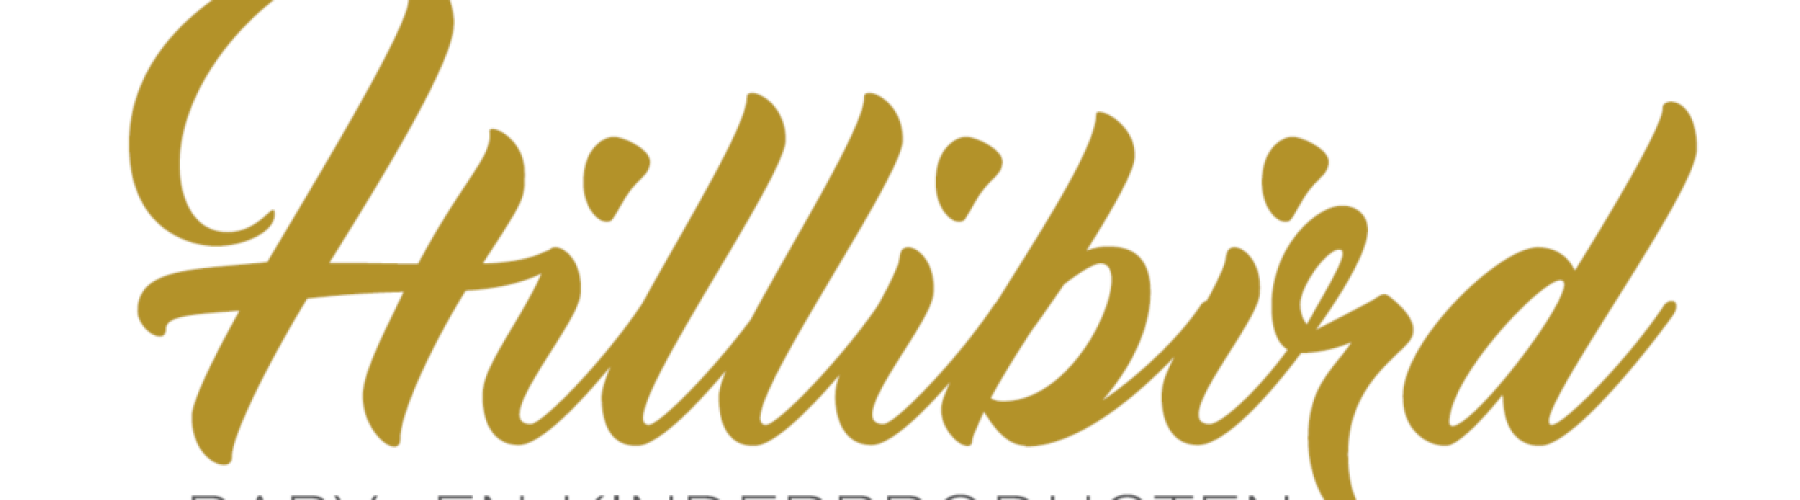 cropped-Hillibird-logo.png